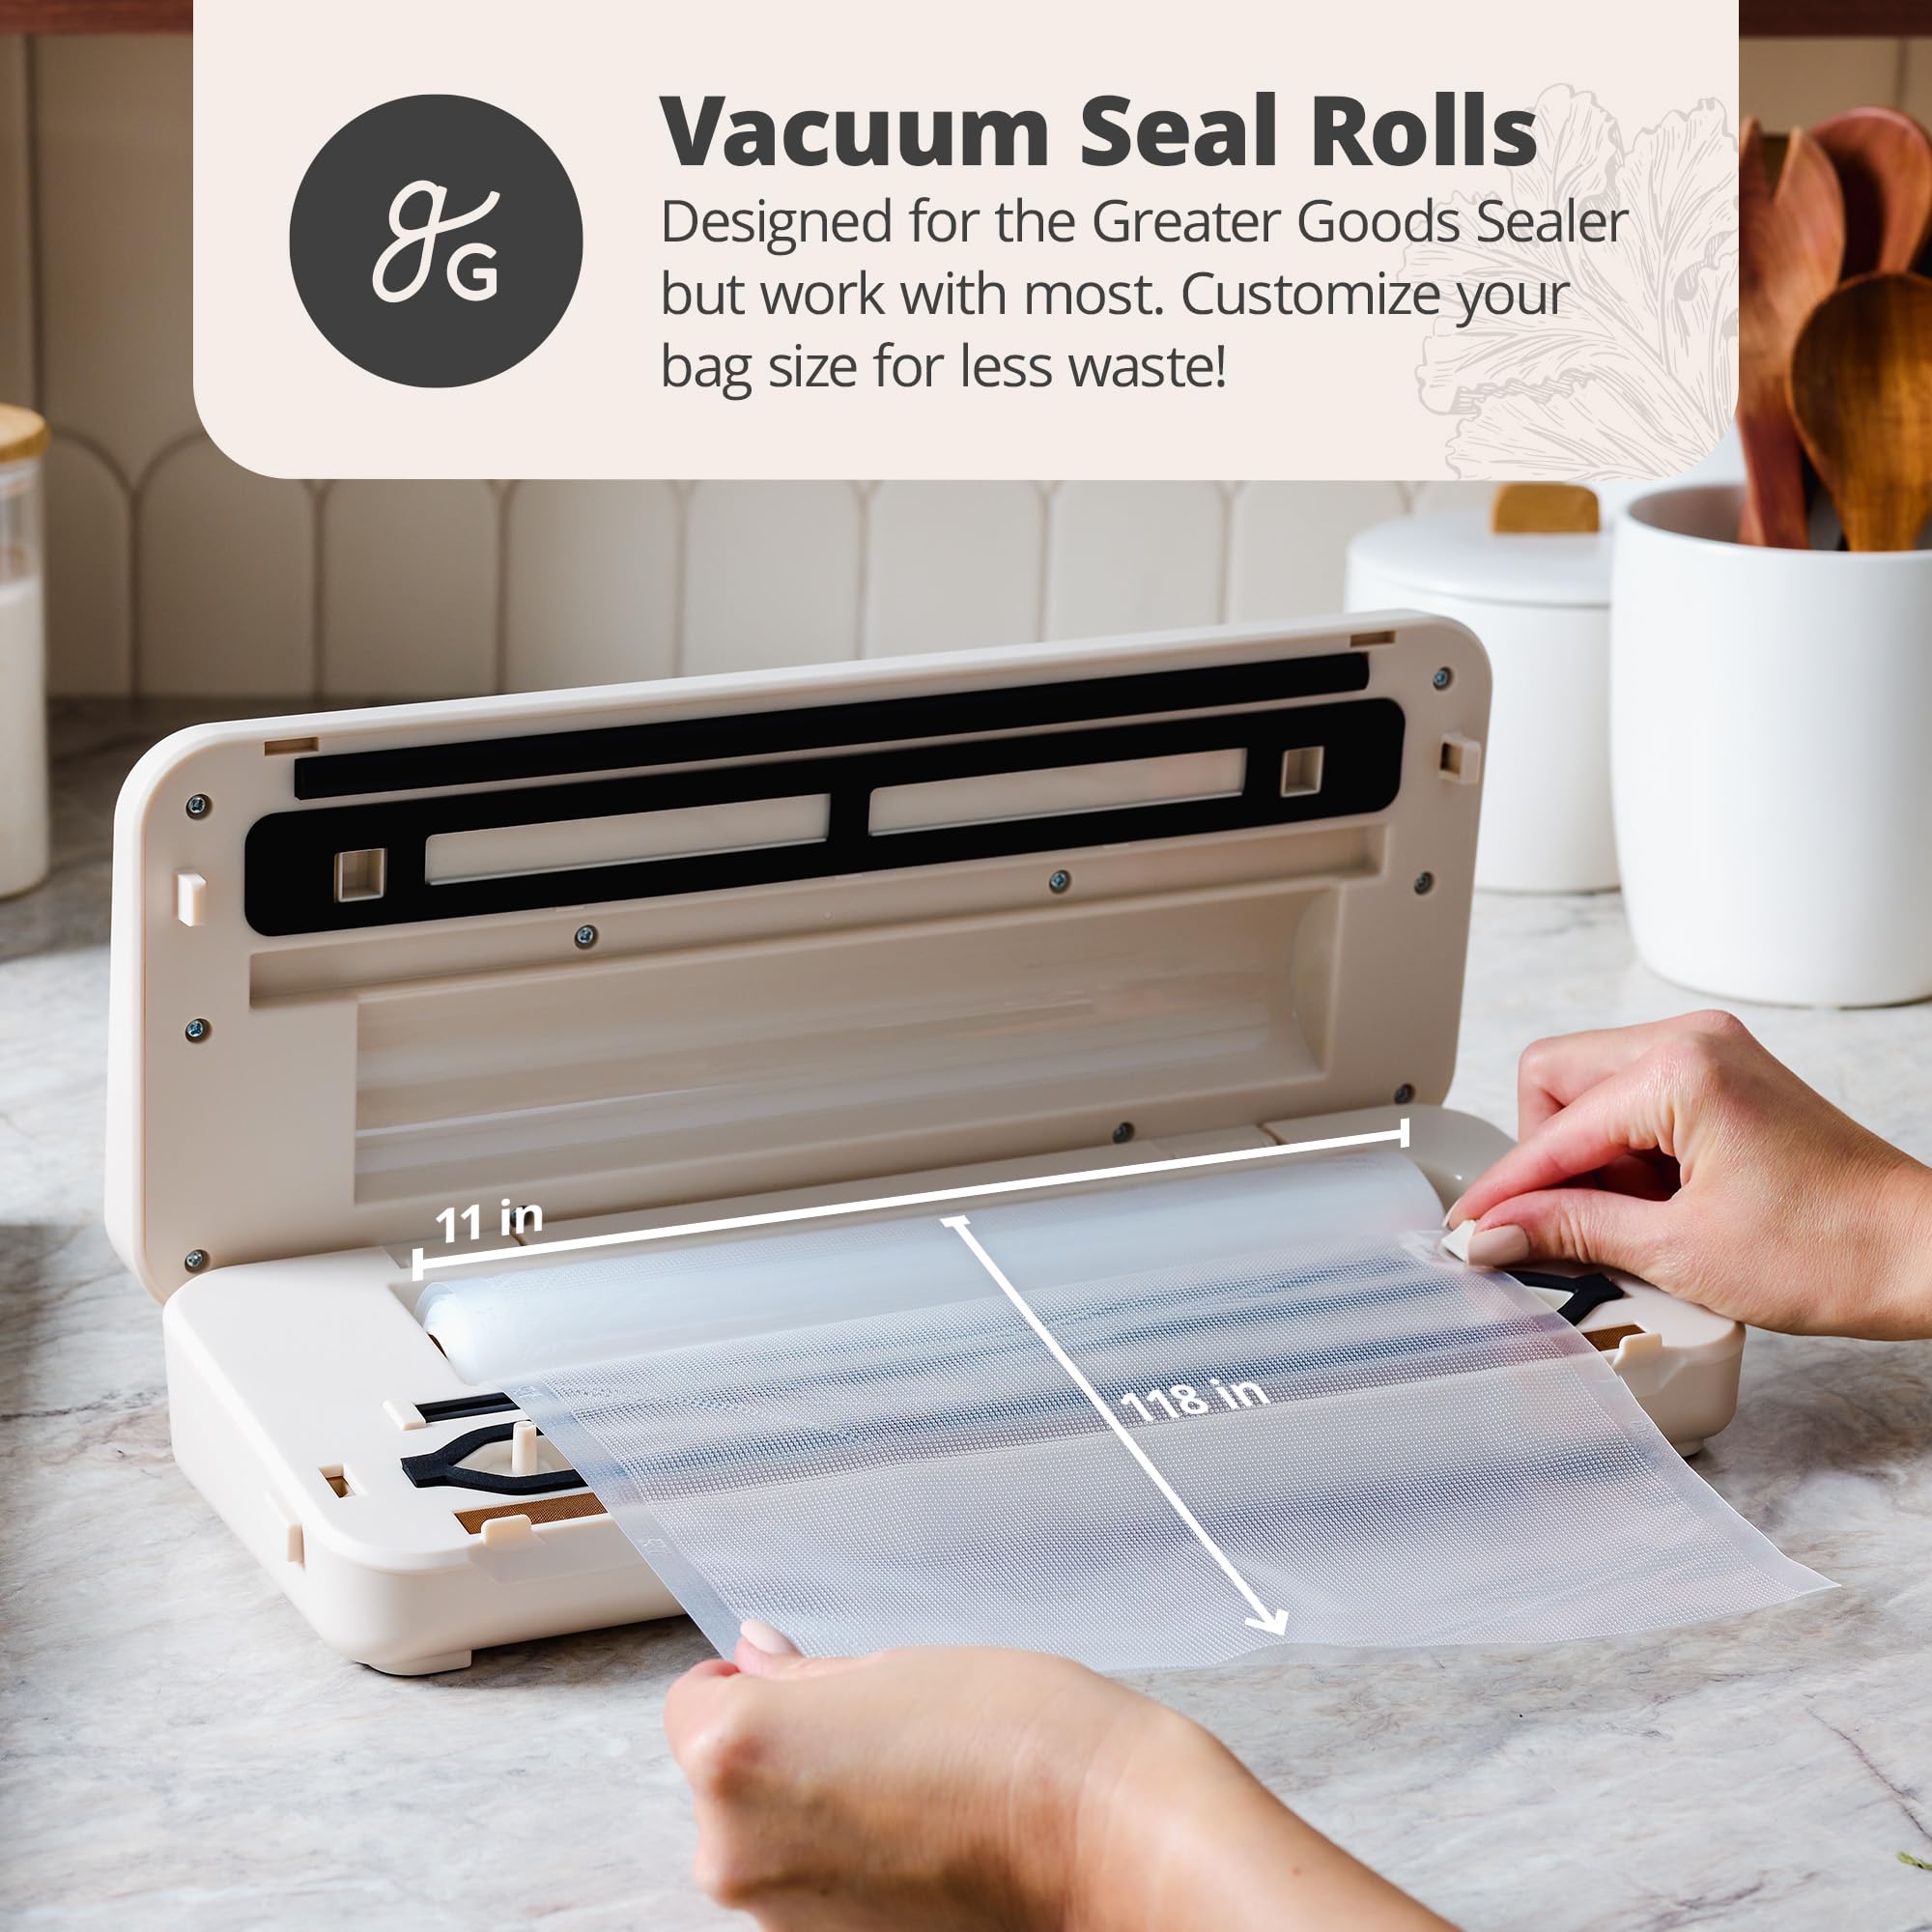 Greater Goods Vacuum Seal Rolls - Pack of 3 Rolls of Food Saver Bags, Each Roll 118 Inches Long | Vacuum Seal Bags Made from Food-Grade, BPA-Free Material | Designed in St. Louis